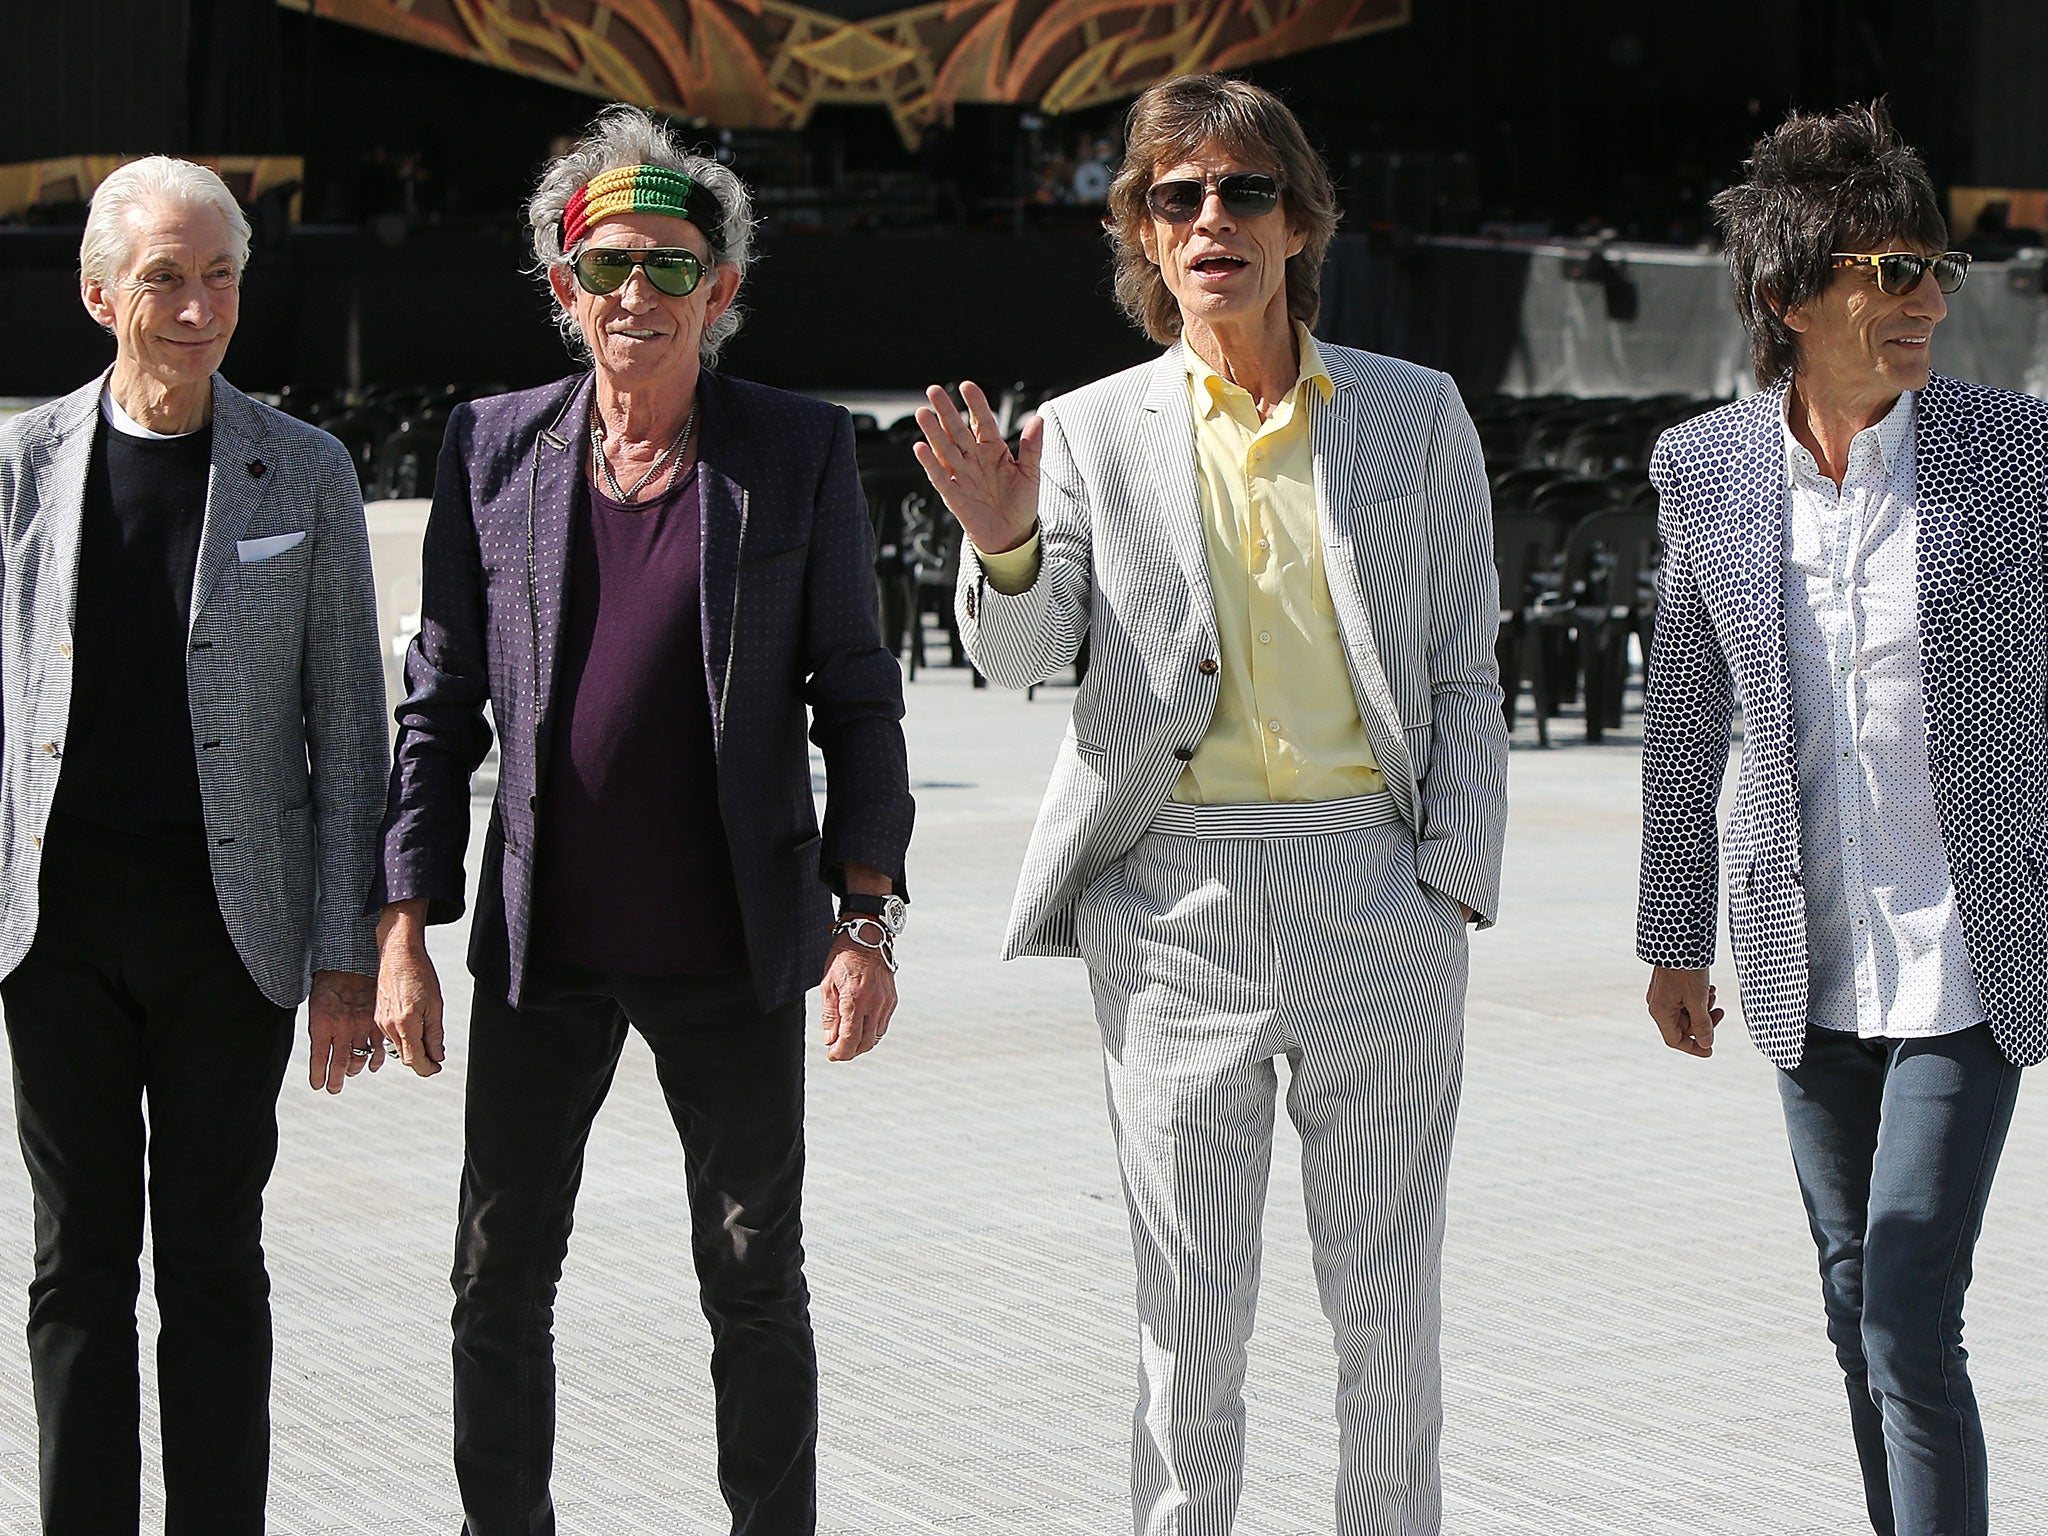 'The band was not asked for permission to use the songs,' a spokeswoman for The Rolling Stones said